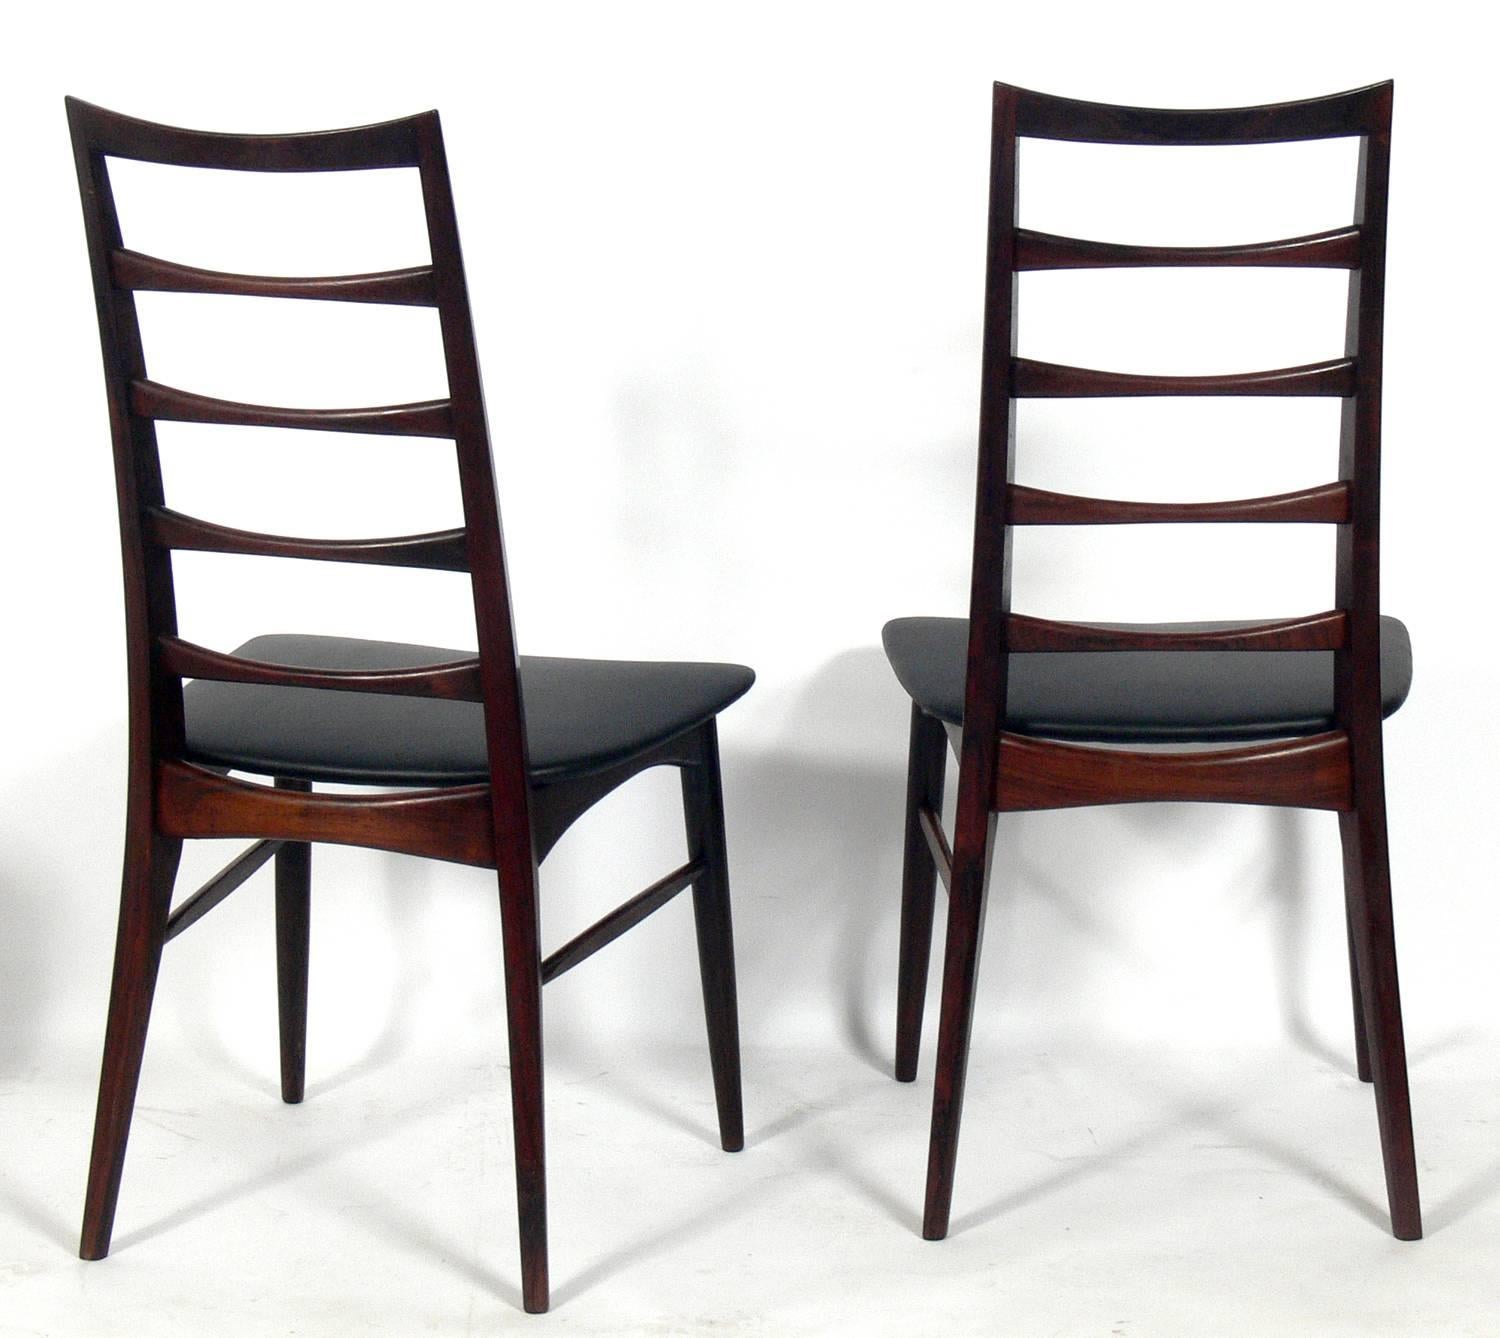 Mid-20th Century Danish Modern Rosewood Dining Chairs by Niels Koefoed